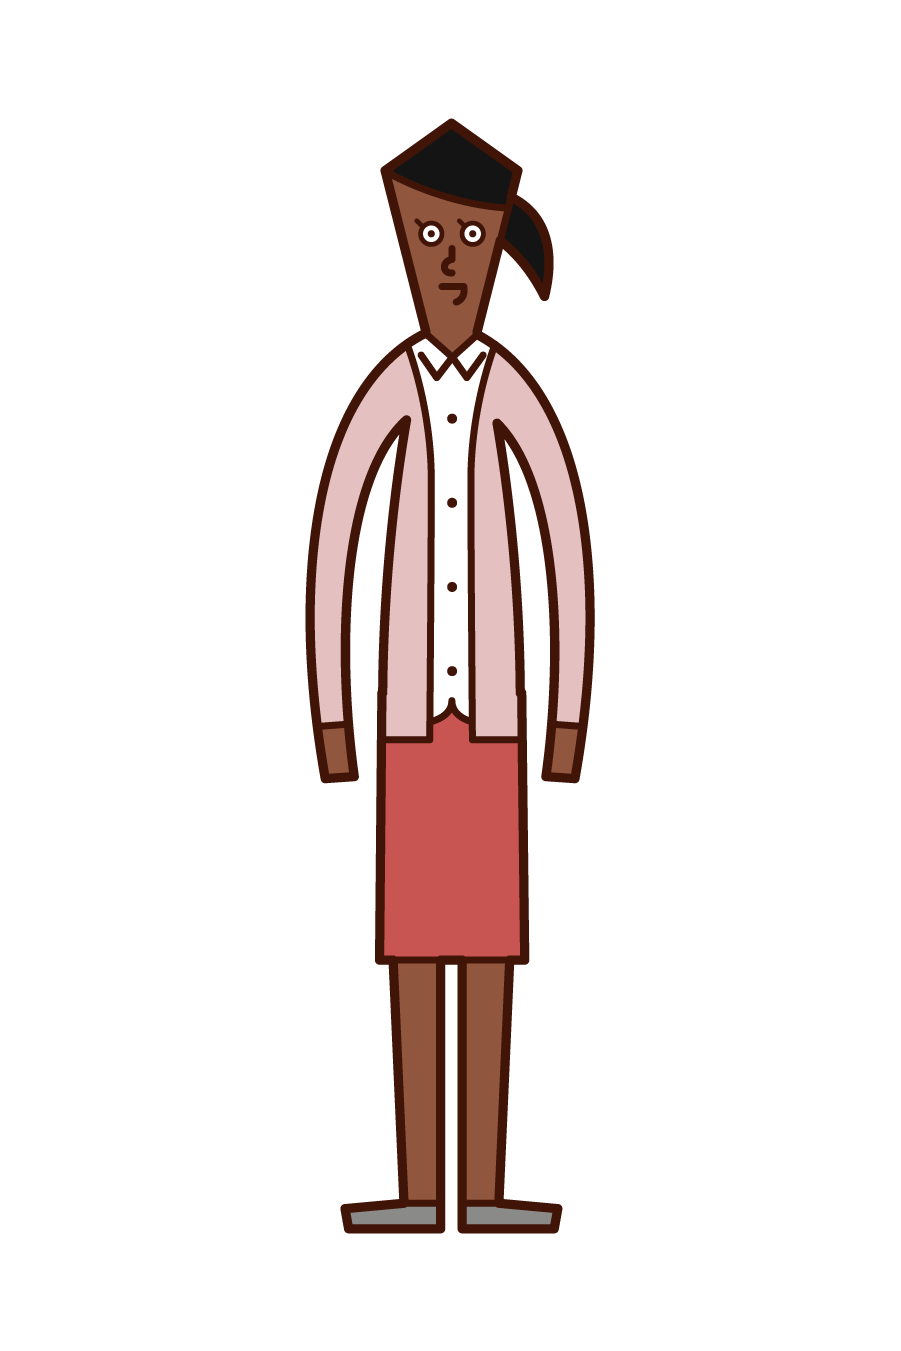 Illustration of a woman wearing a cardigan